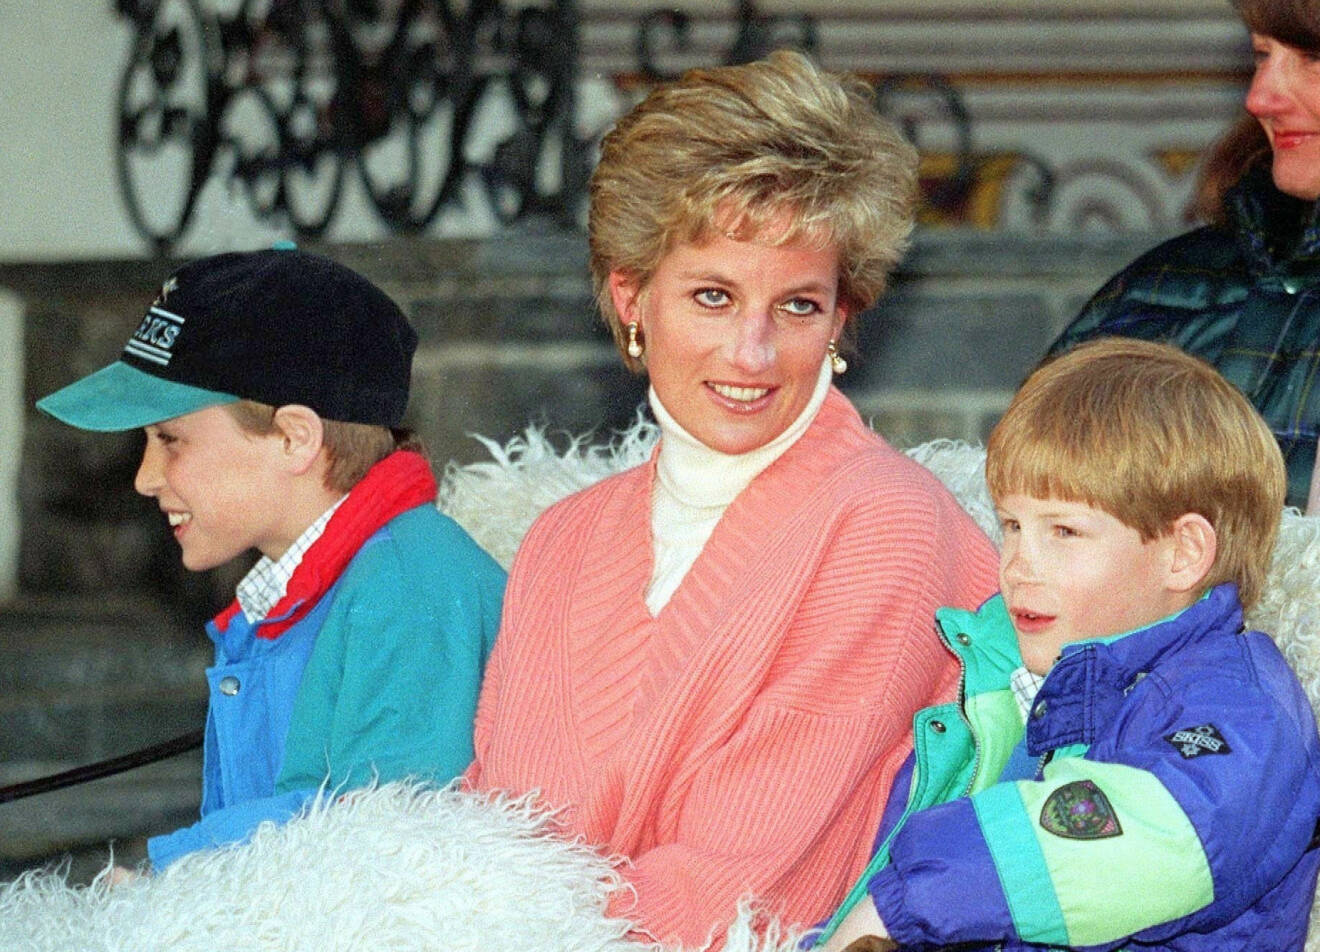 LECH, AUSTRIA - 27.03.1994. THE PRINCESS OF WALES AND SONS PRINCE WILLIAM AND PRINCE HARRY IN CARRIAGE DURING THE SKIING HOLIDAY IN LECH, AUSTRIA. Photo: Robin Nunn/ Nunn Syndication Code: 4008 COPYRIGHT STELLA PICTURES Photo: Nunn Syndication Code: 4008 COPYRIGHT STELLA PICTURES